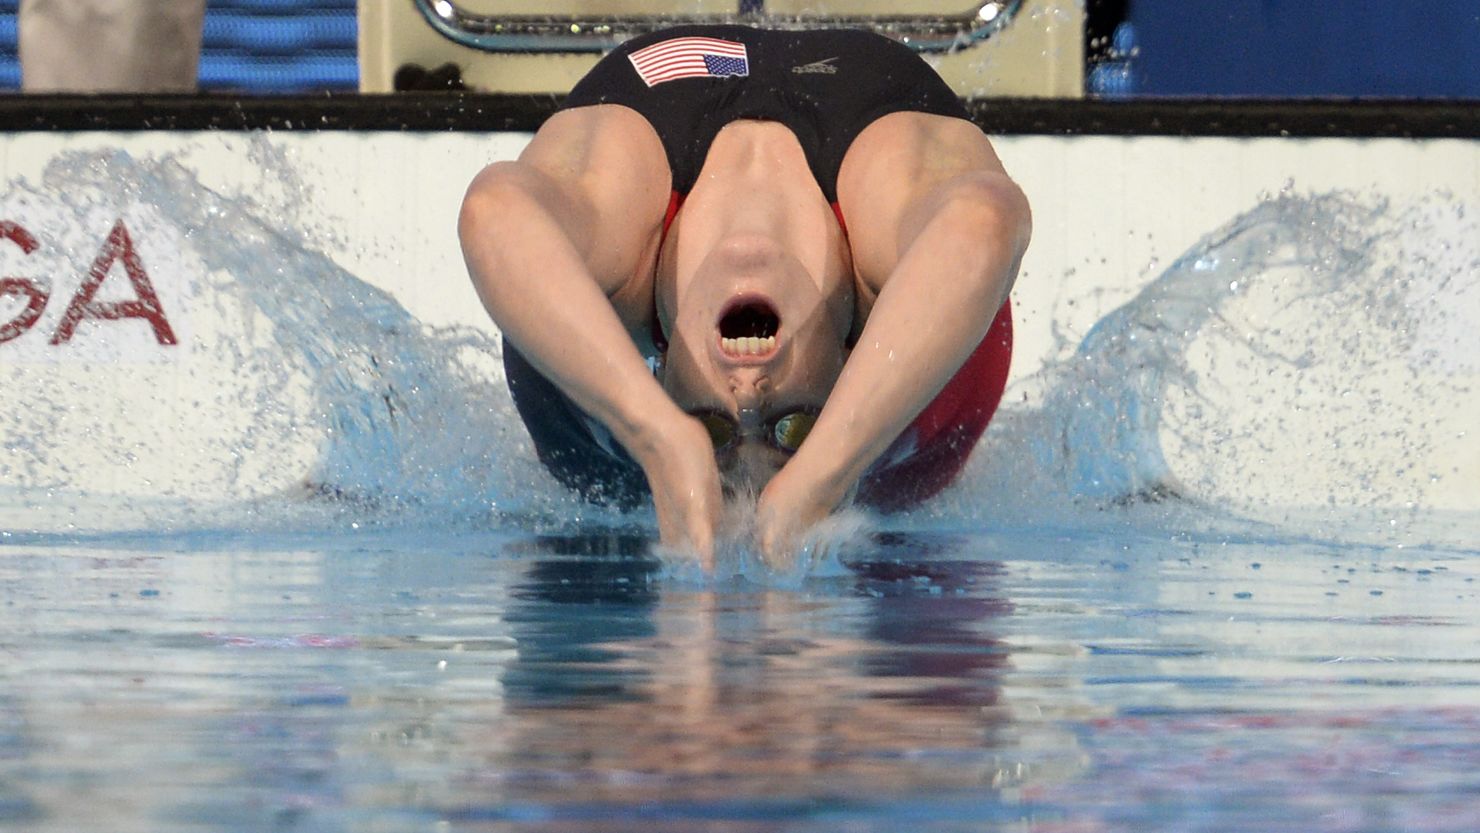 Missy Franklin sets off in the 200m backstroke final at the swimming world championships in Barcelona.